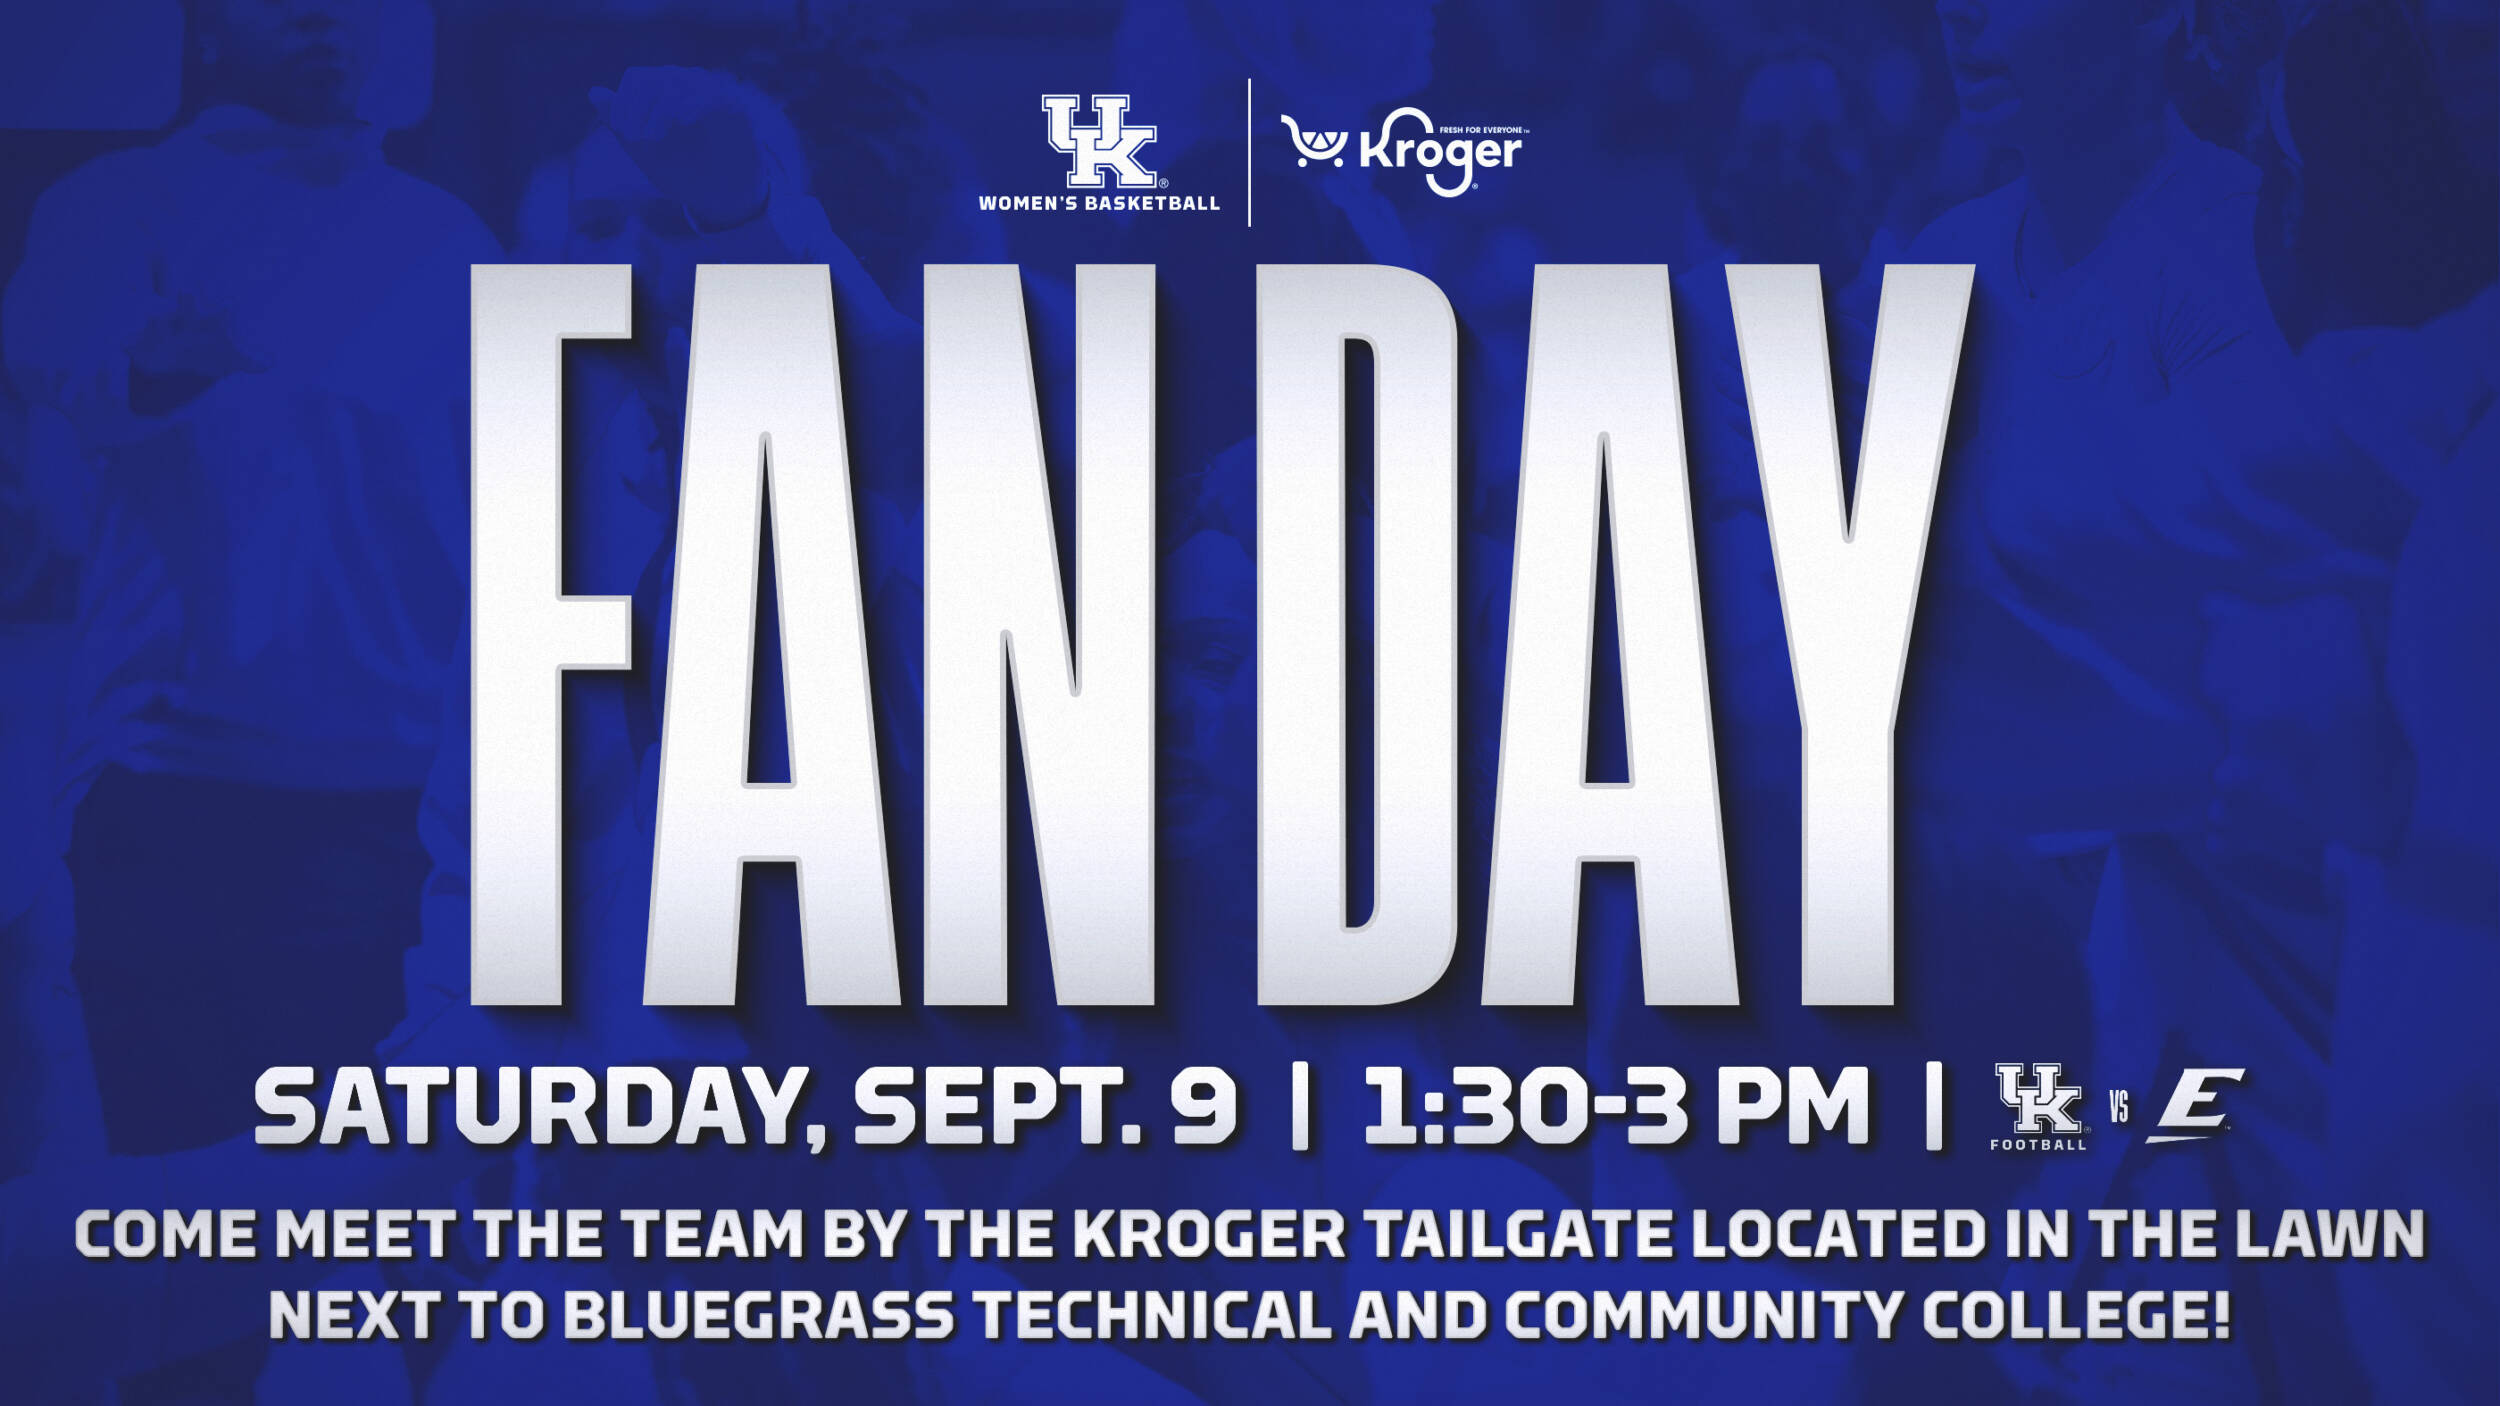 UK Women’s Basketball Fan Day Scheduled for Saturday, Sept. 9